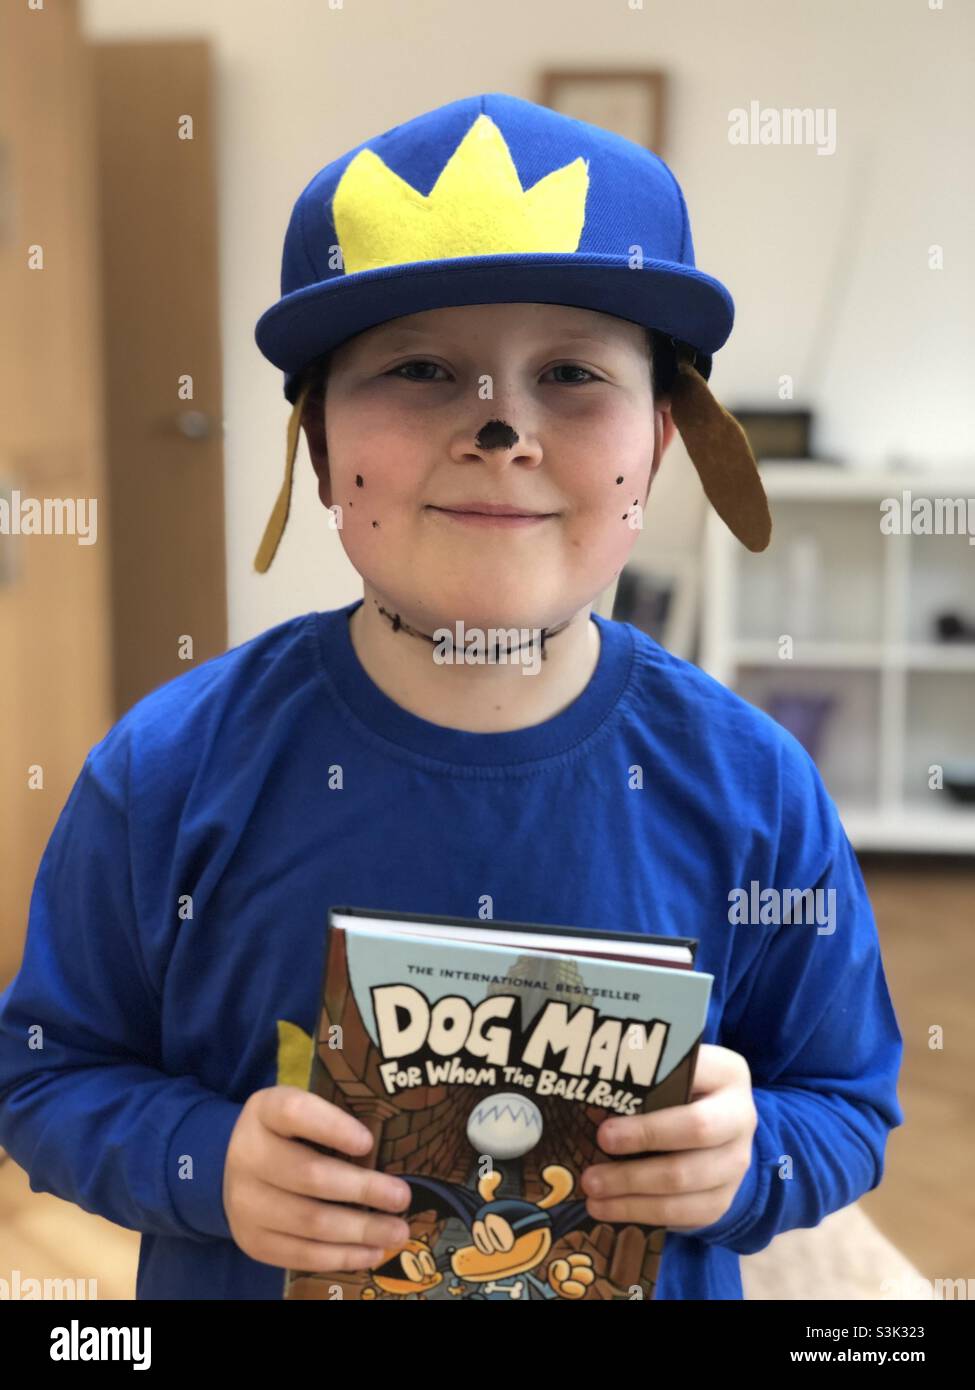 A boy dressed as Comic book character Dog Man for world book day. Stock Photo